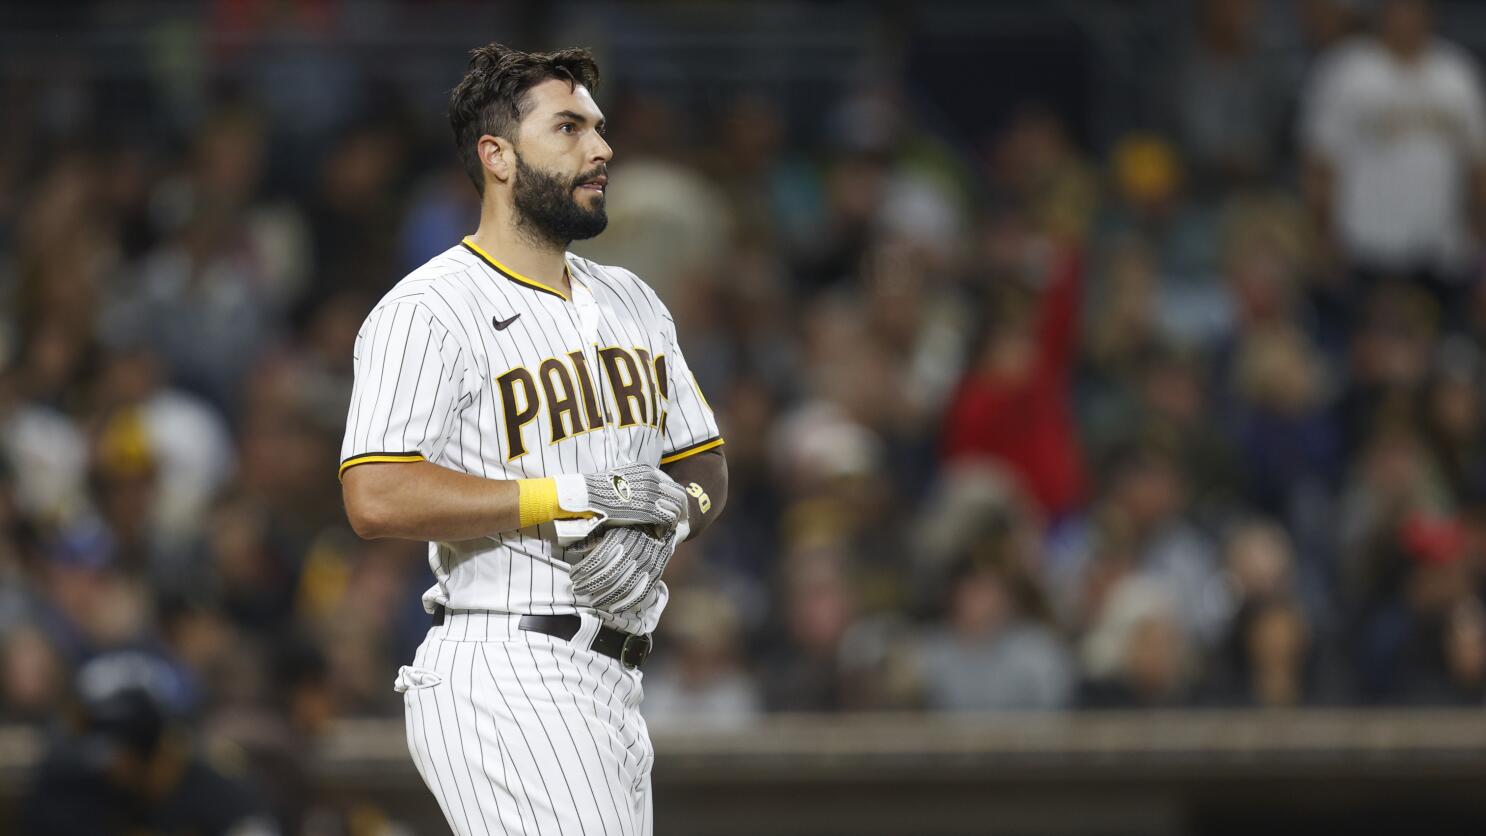 Eric Hosmer agrees to eight-year, $144 million deal with Padres